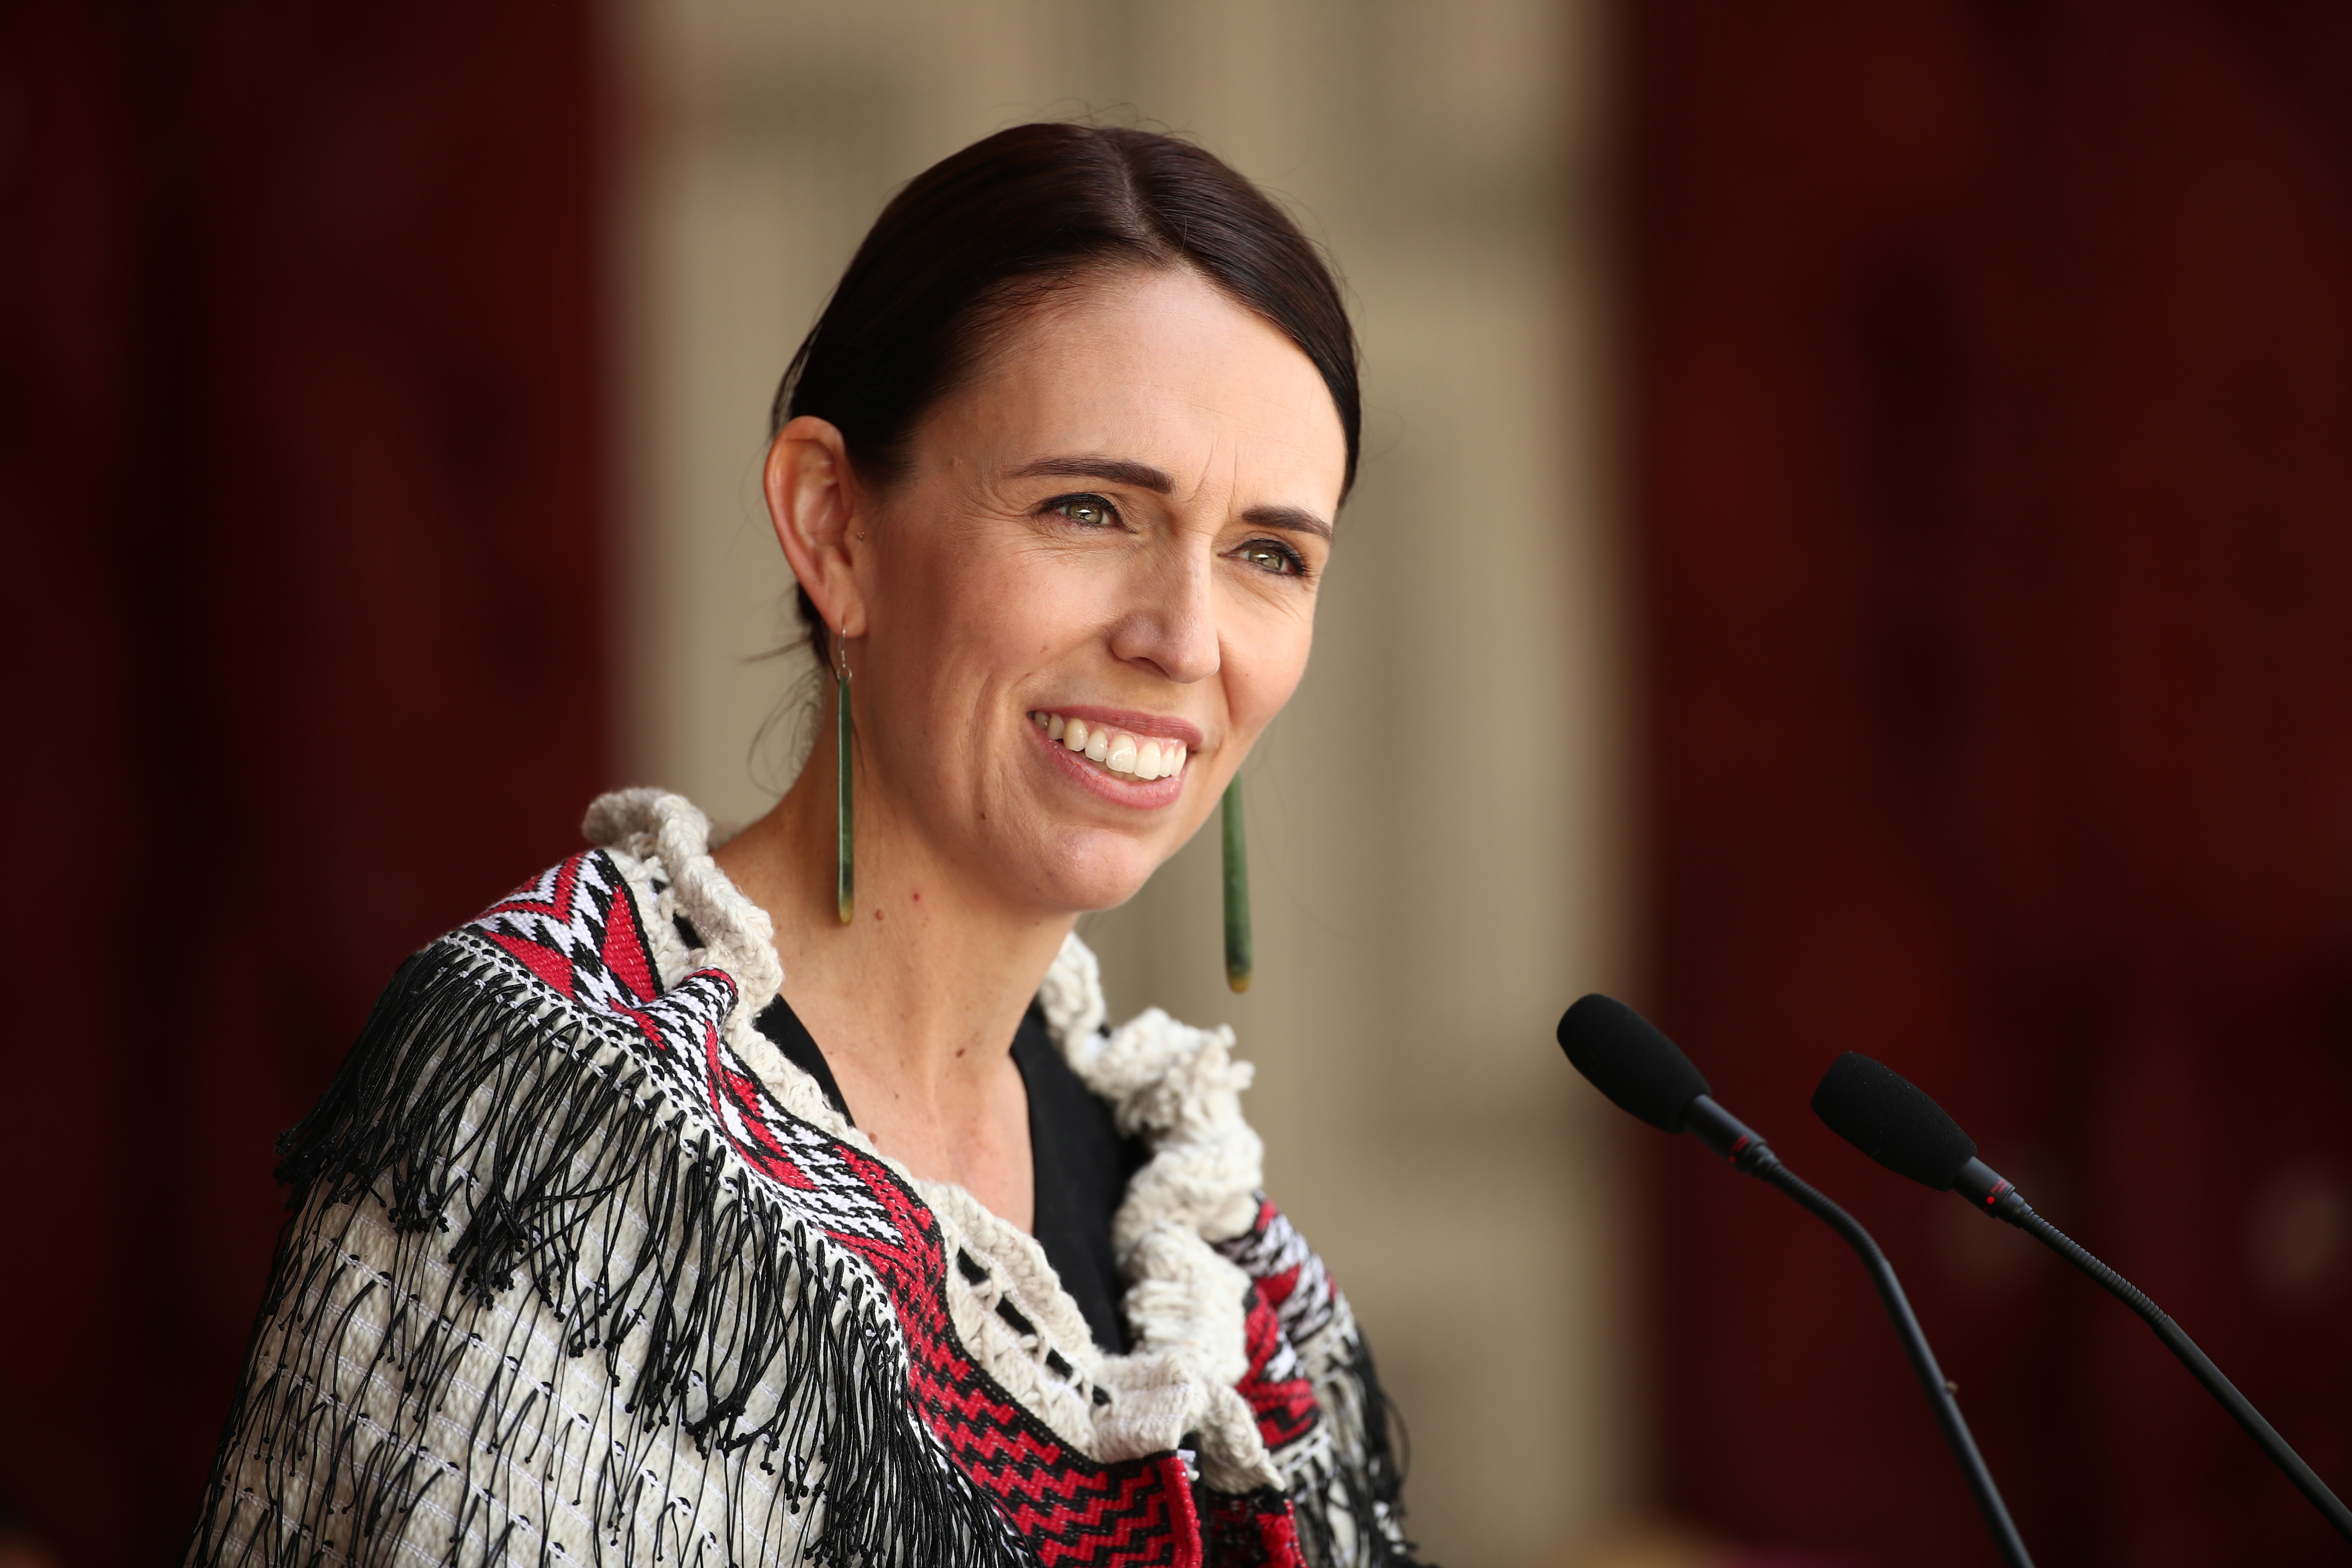 Jacinda Ardern described Jojo Rabbit as "a movie for the right time."